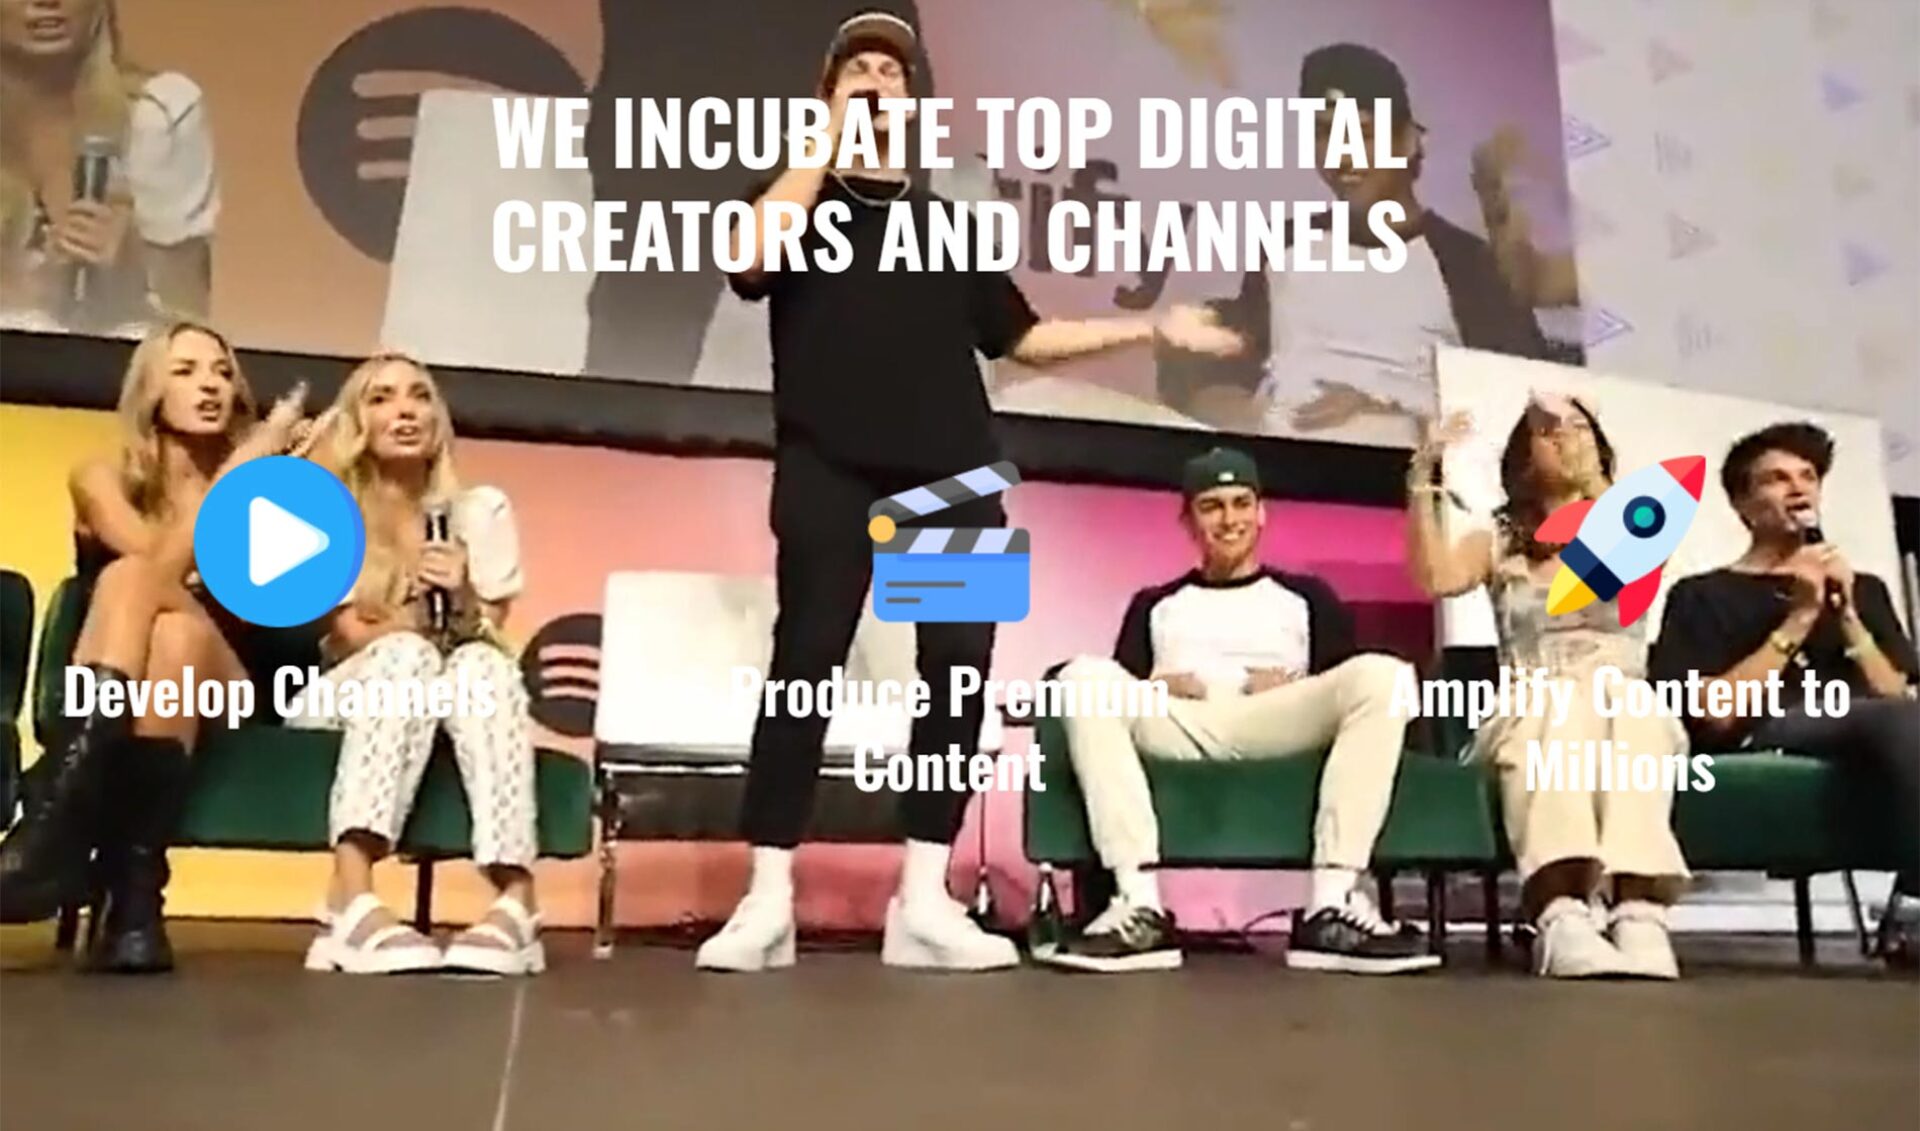 The Clapper app is a place where the parents of TikTok users can express  themselves - Tubefilter